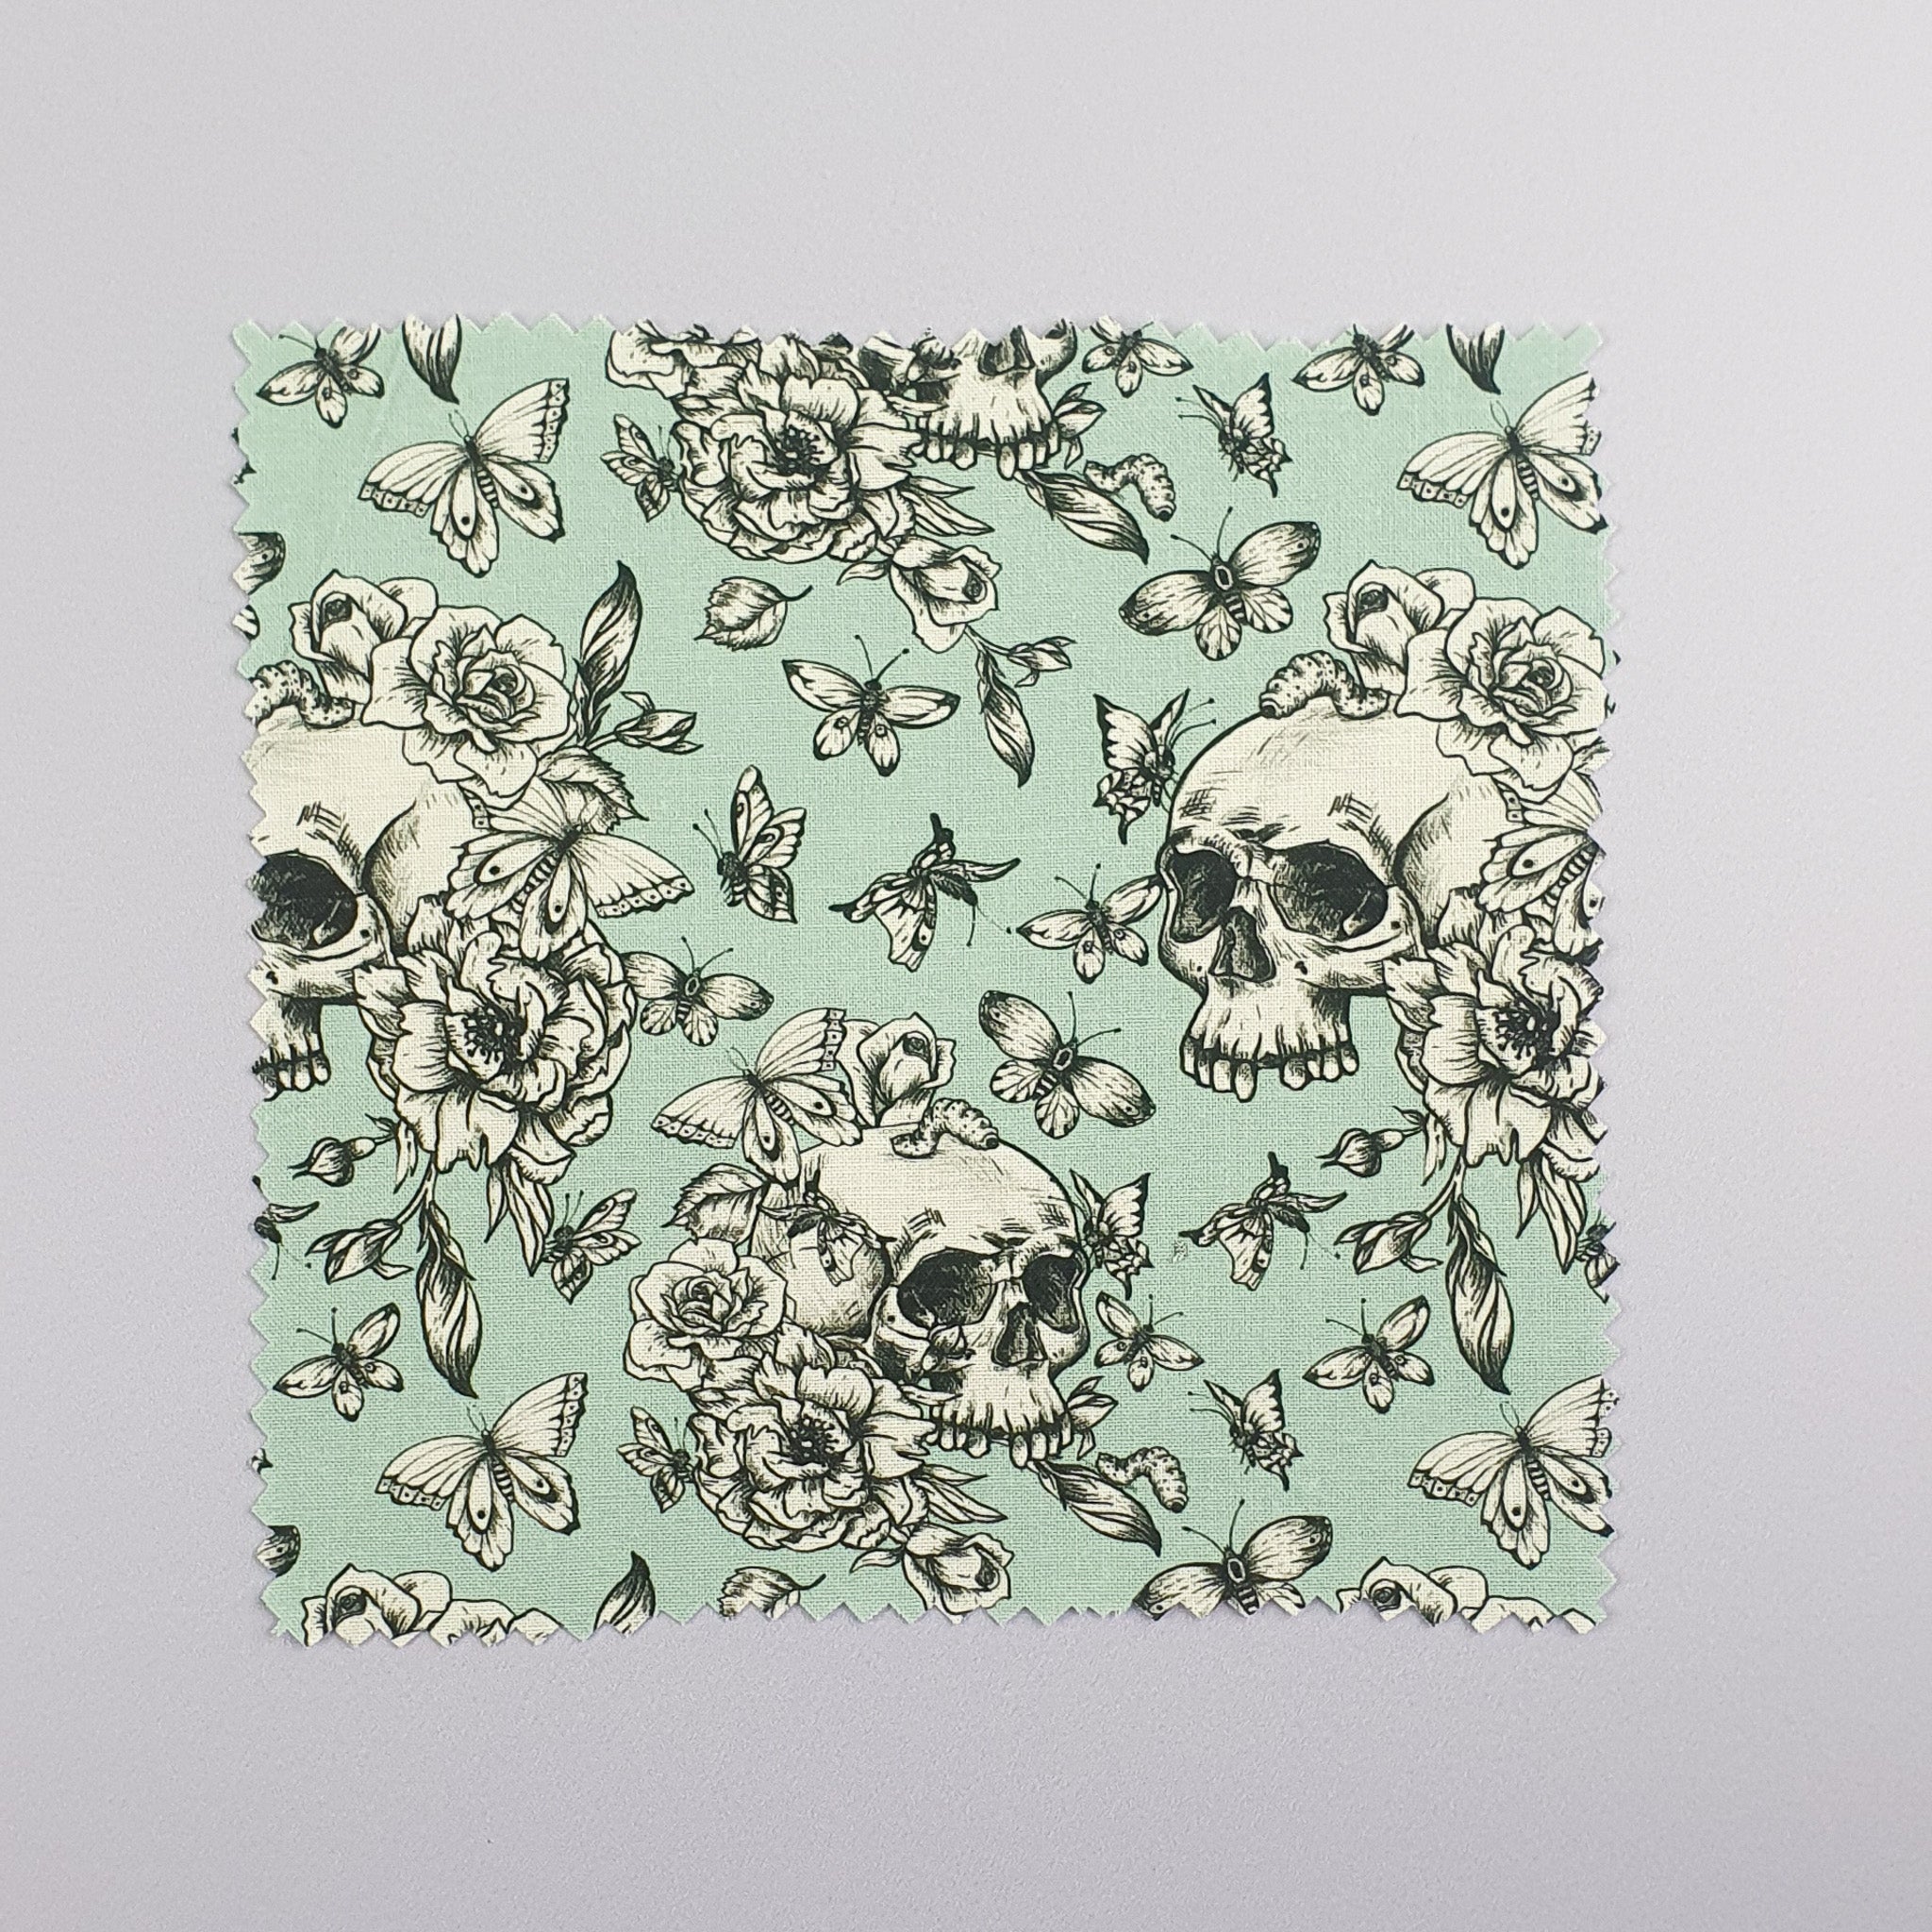 Grime Guard Floral Skull Fabric Swatch